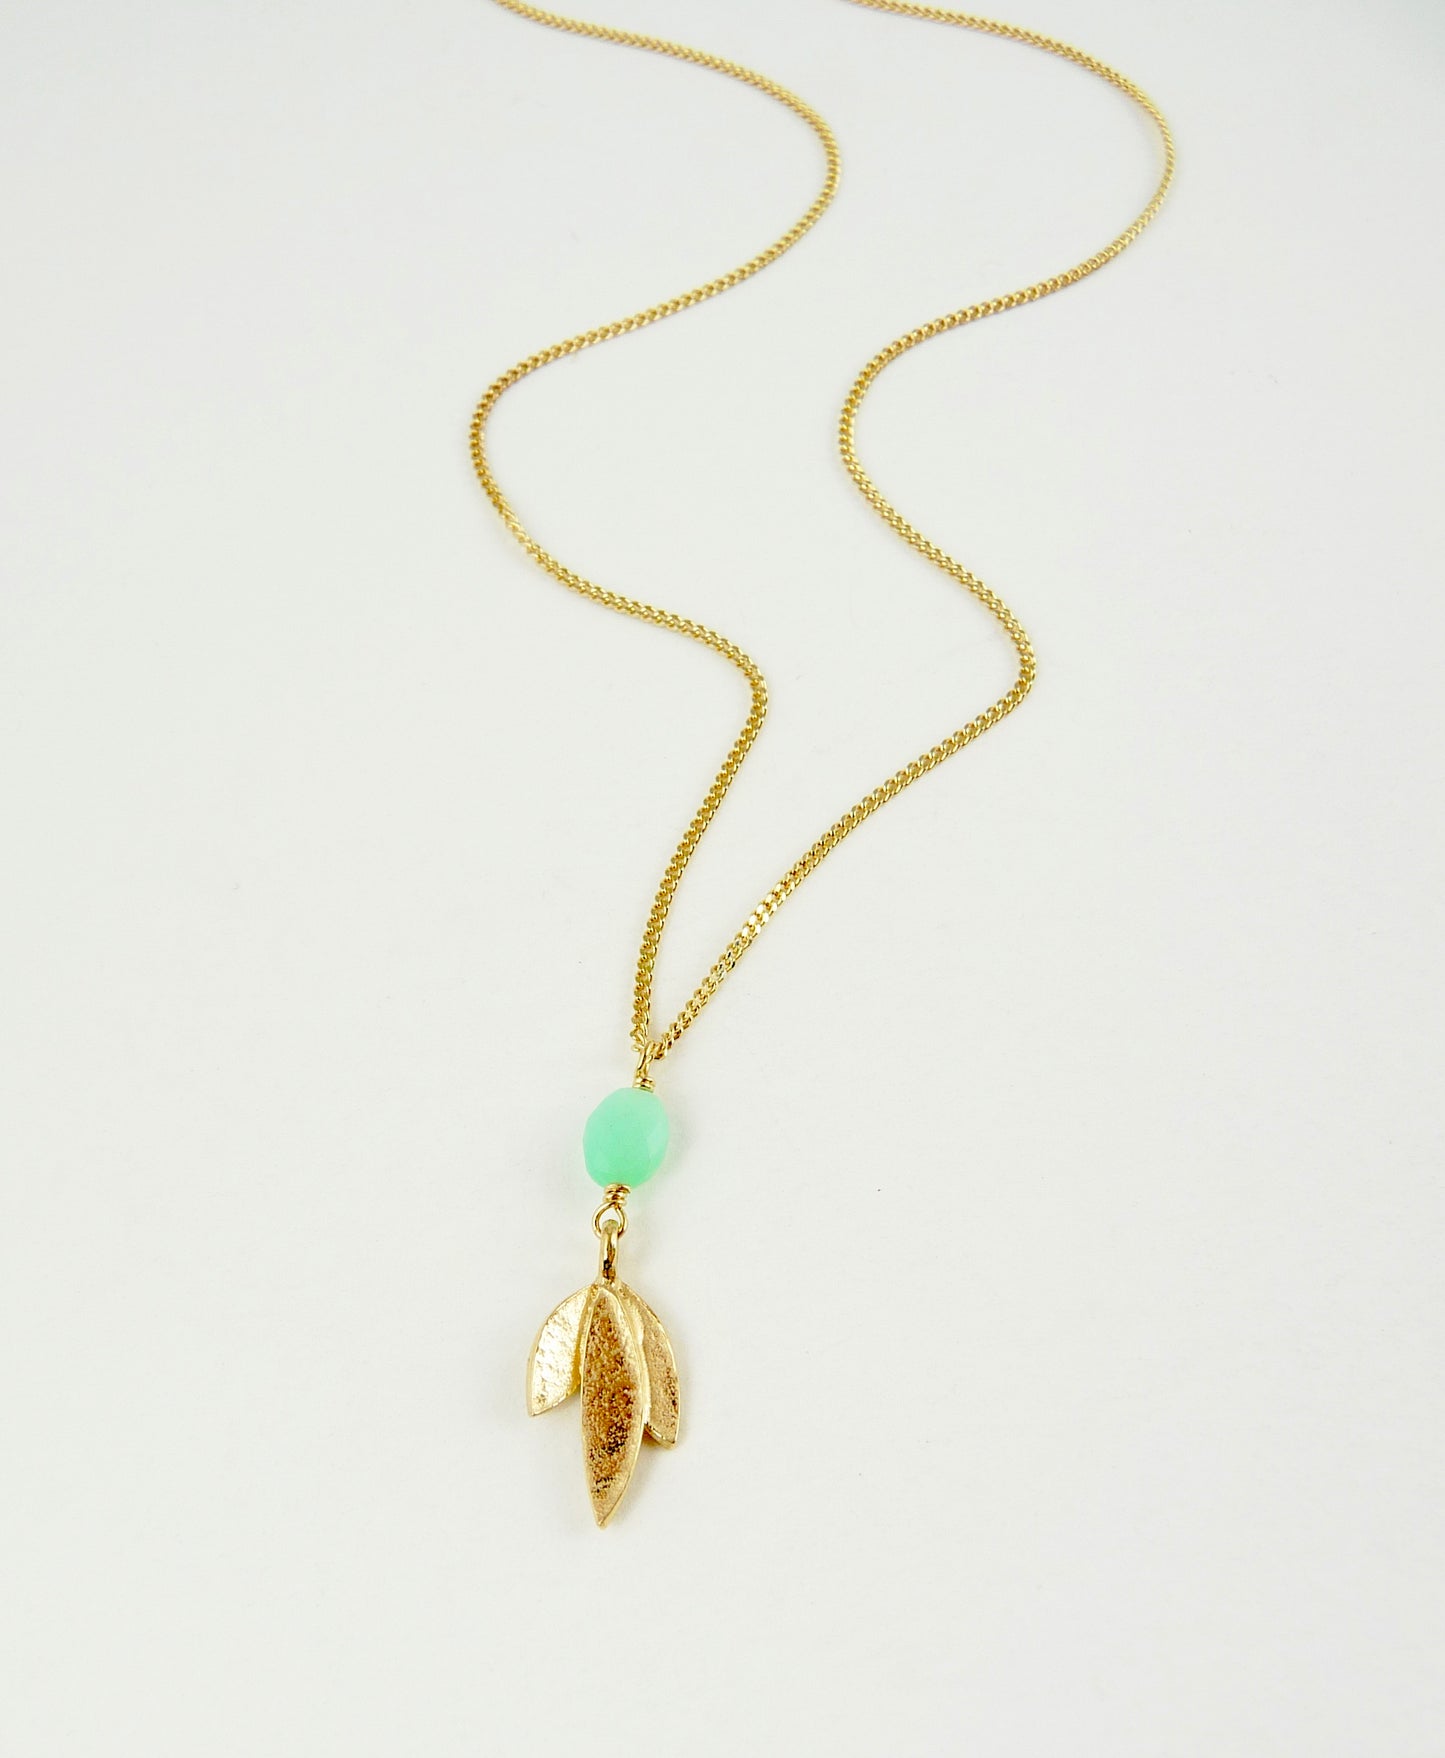 Martha Flower Necklace with Chrysoprase